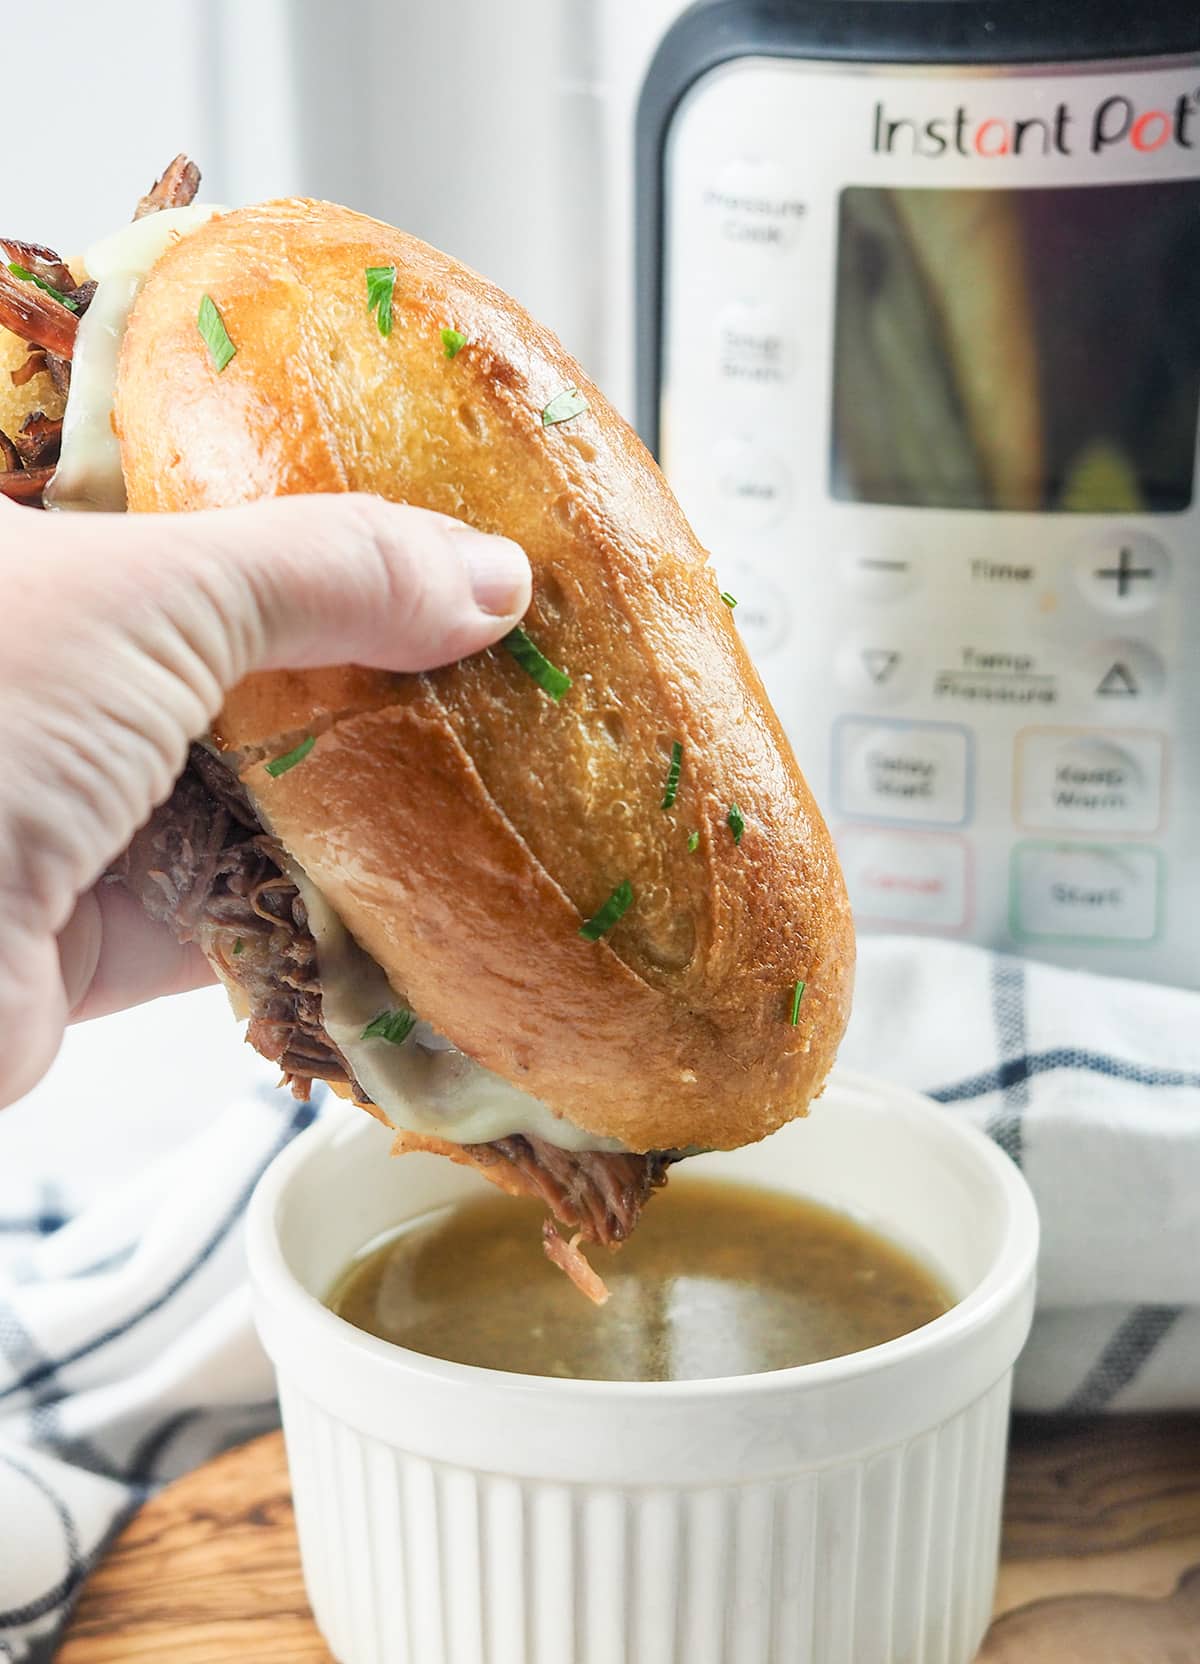 7 Best Au Jus Substitute for Cooking (Recipes Included